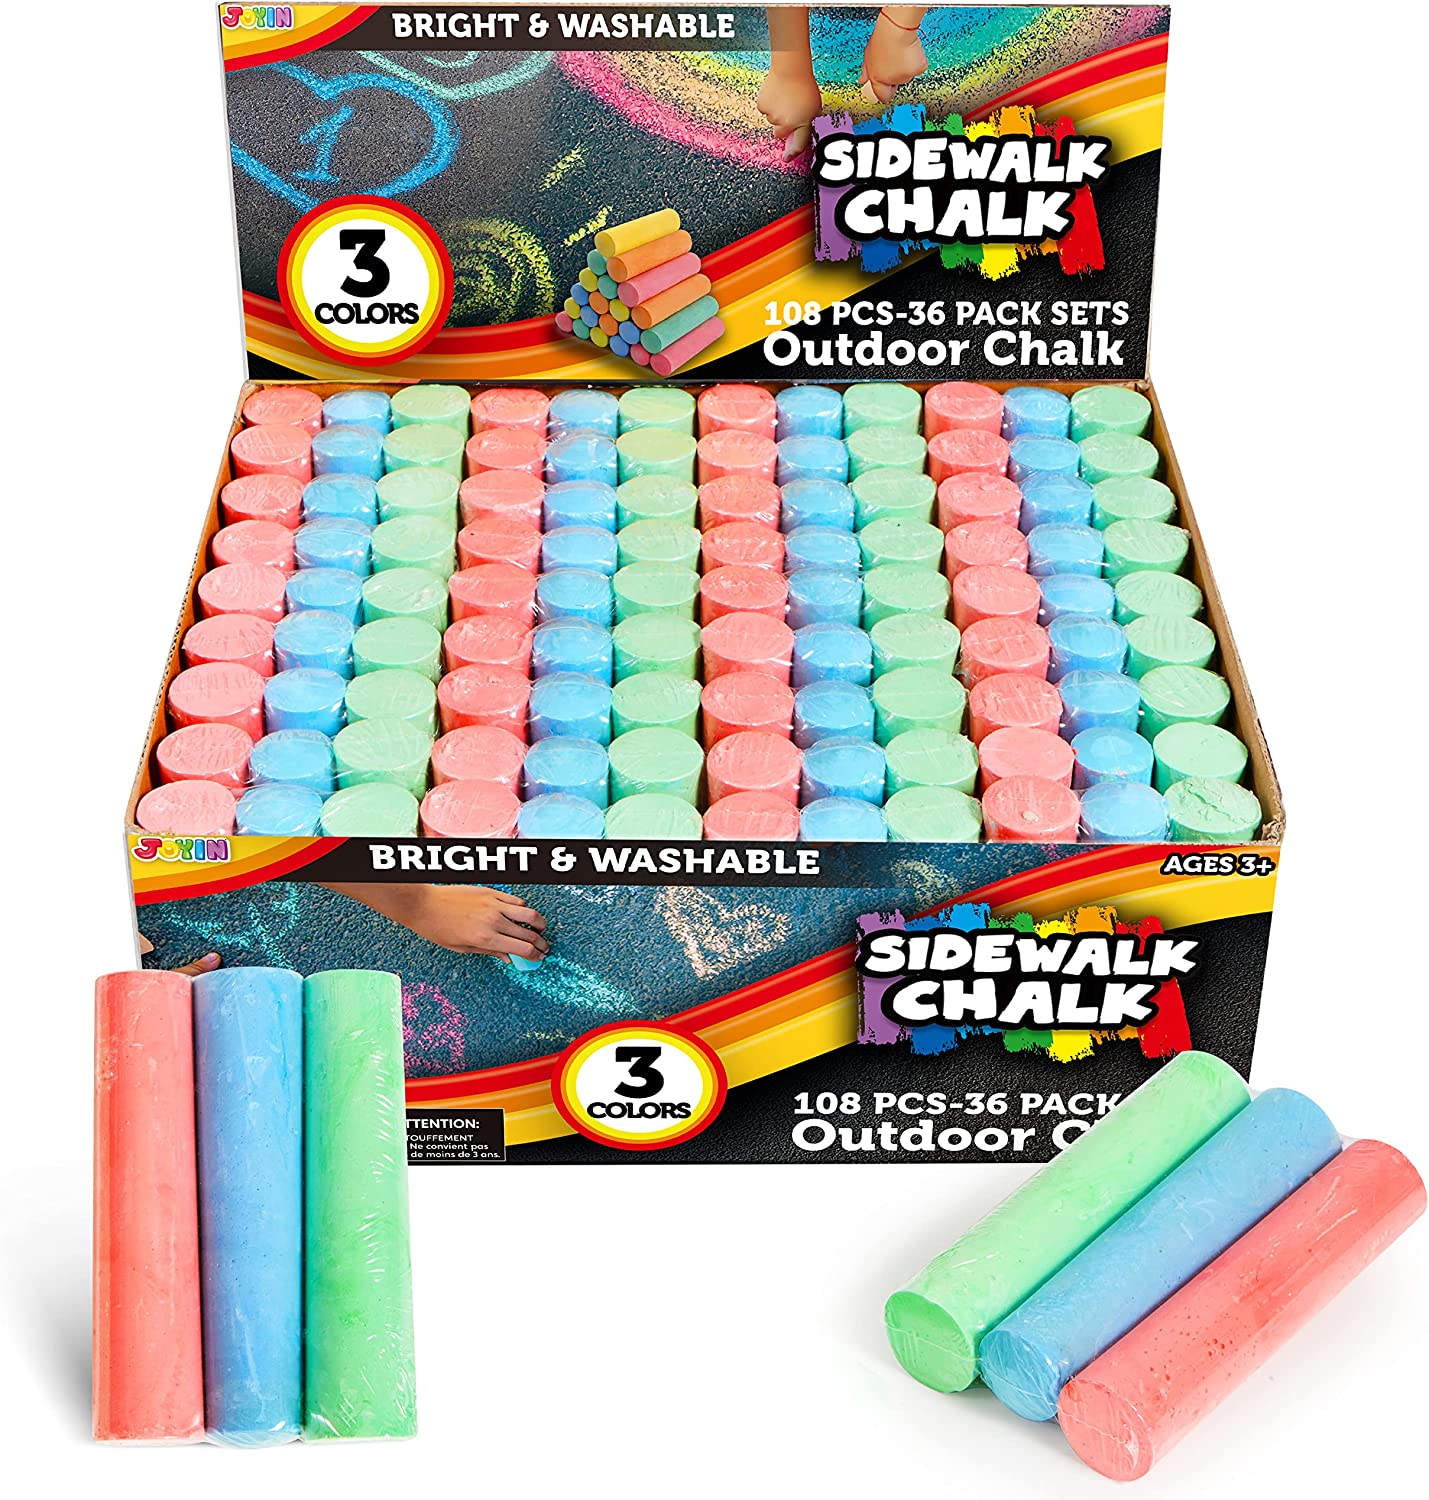 JOYIN 108 Pcs Sidewalk Chalk Set in 36 Count, 3 Assorted Colors, Non-Toxic Jumbo Washable Driveway Chalk for Outdoor Art Play, Great Gift Toys for